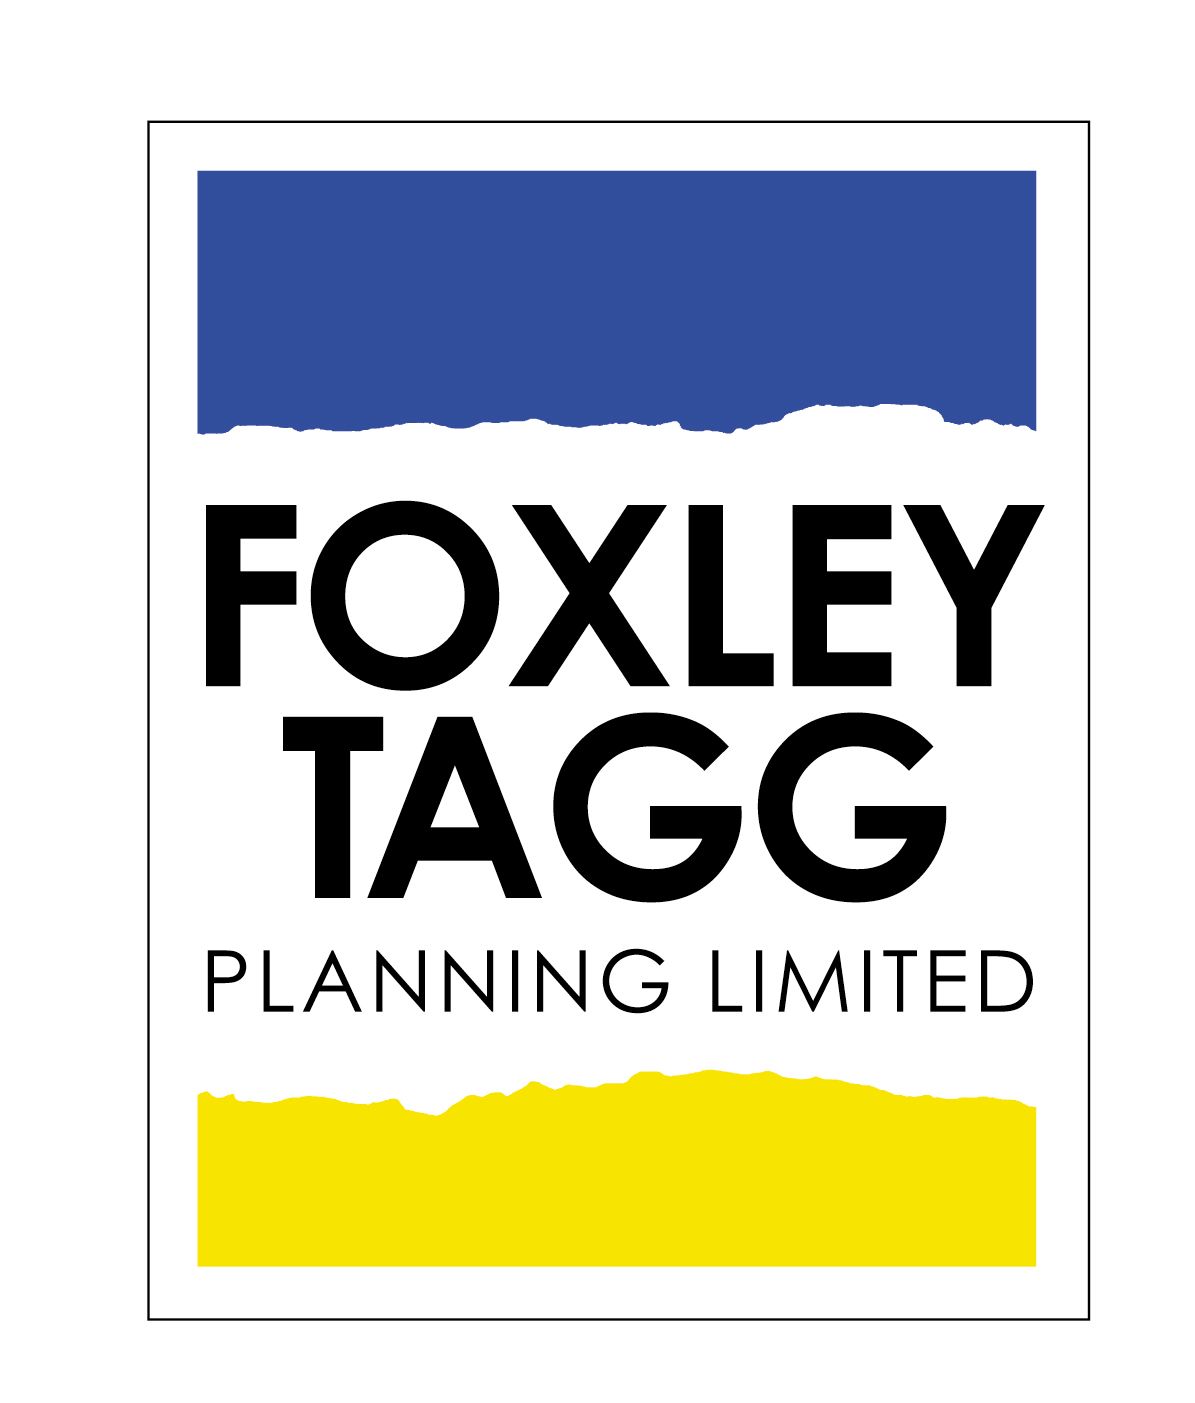 Foxley Tagg